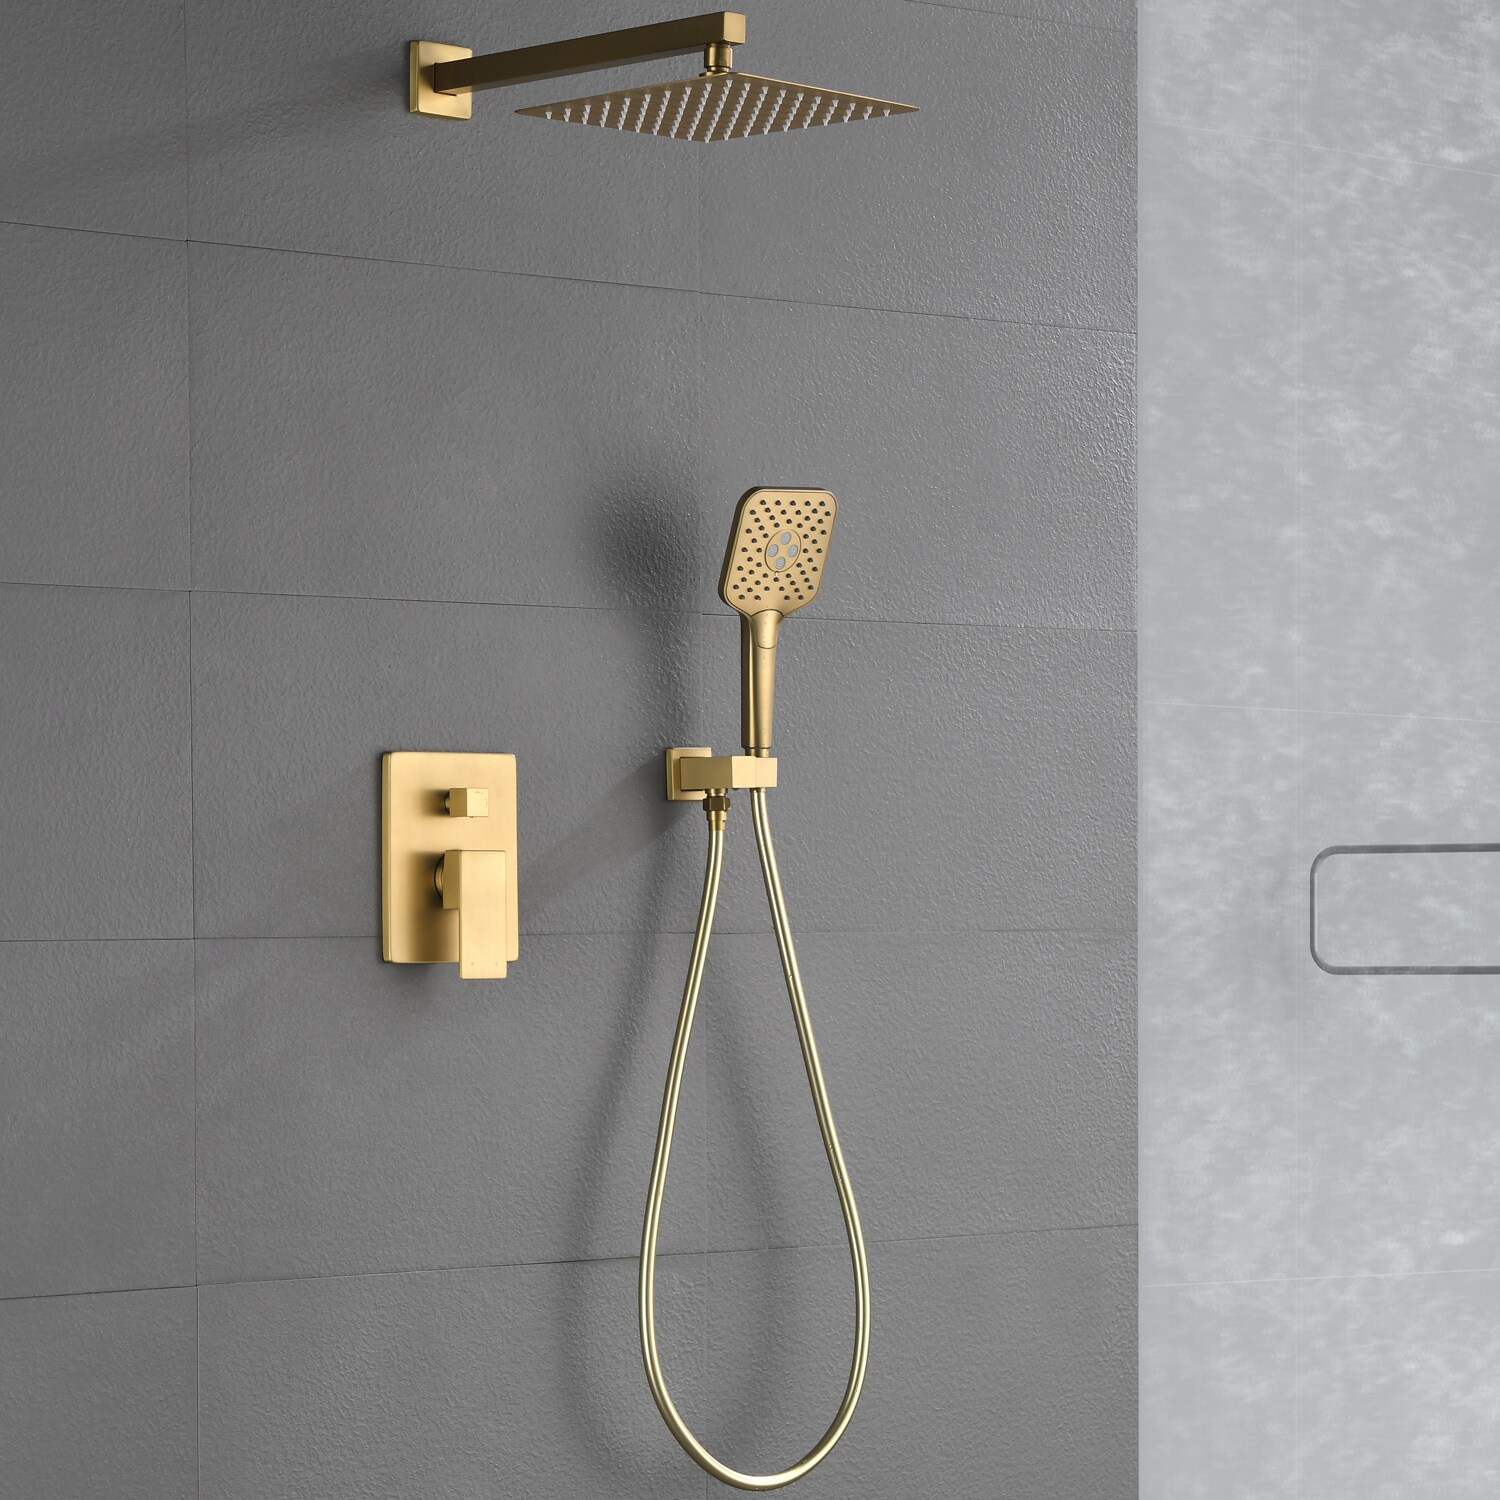 Burnished Brass gold shower head set 250 mm DIA round wall ceiling arm handle up 